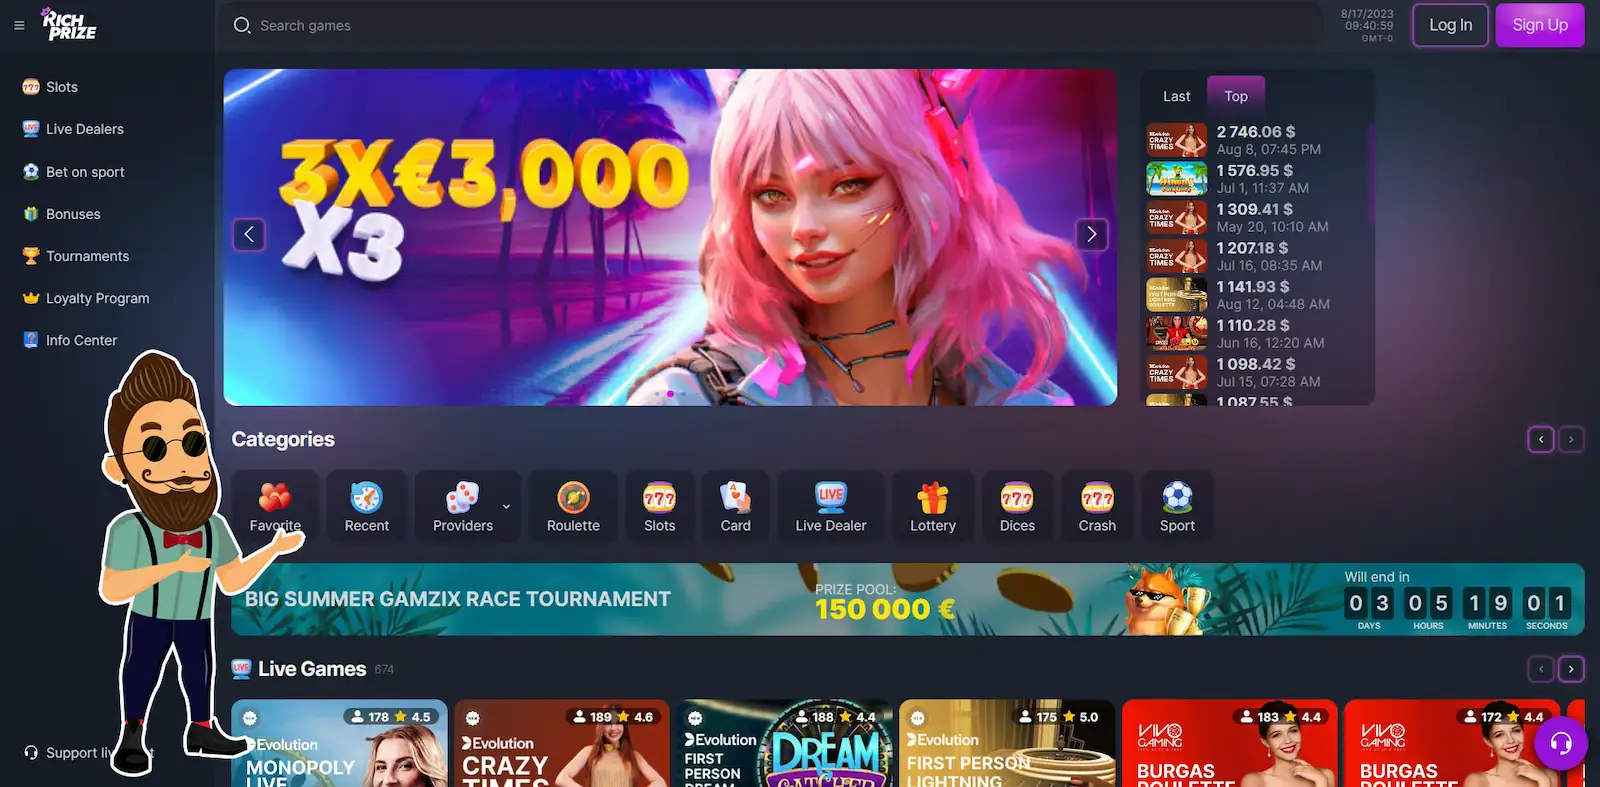 A Review Of Rich Prize Casino